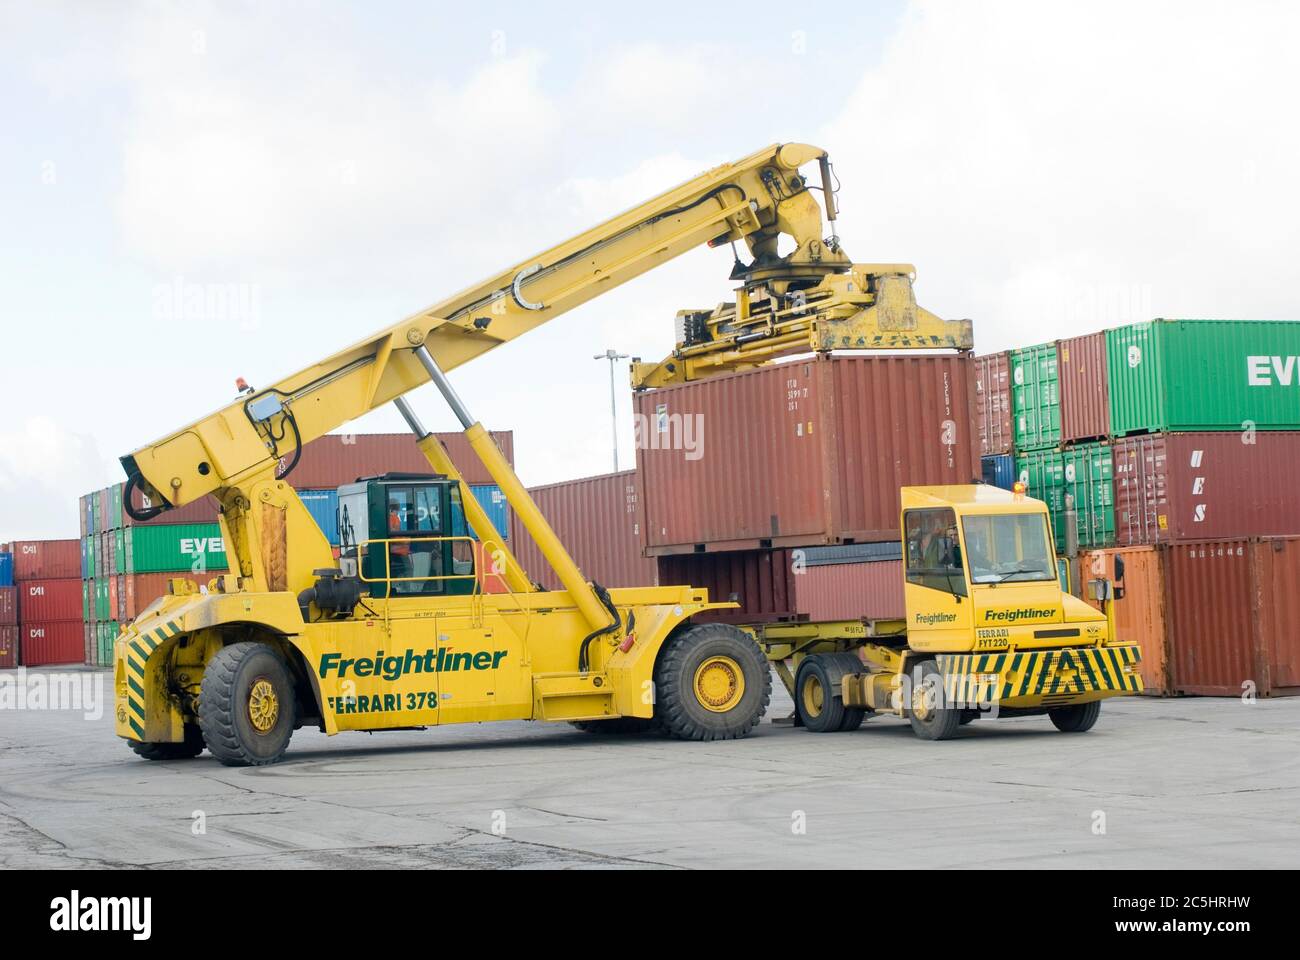 CVS Ferrari reach stacker and terminal tractor being used to move shipping containers at Manchester Euroterminal, Trafford Park, Manchester, England. Stock Photo